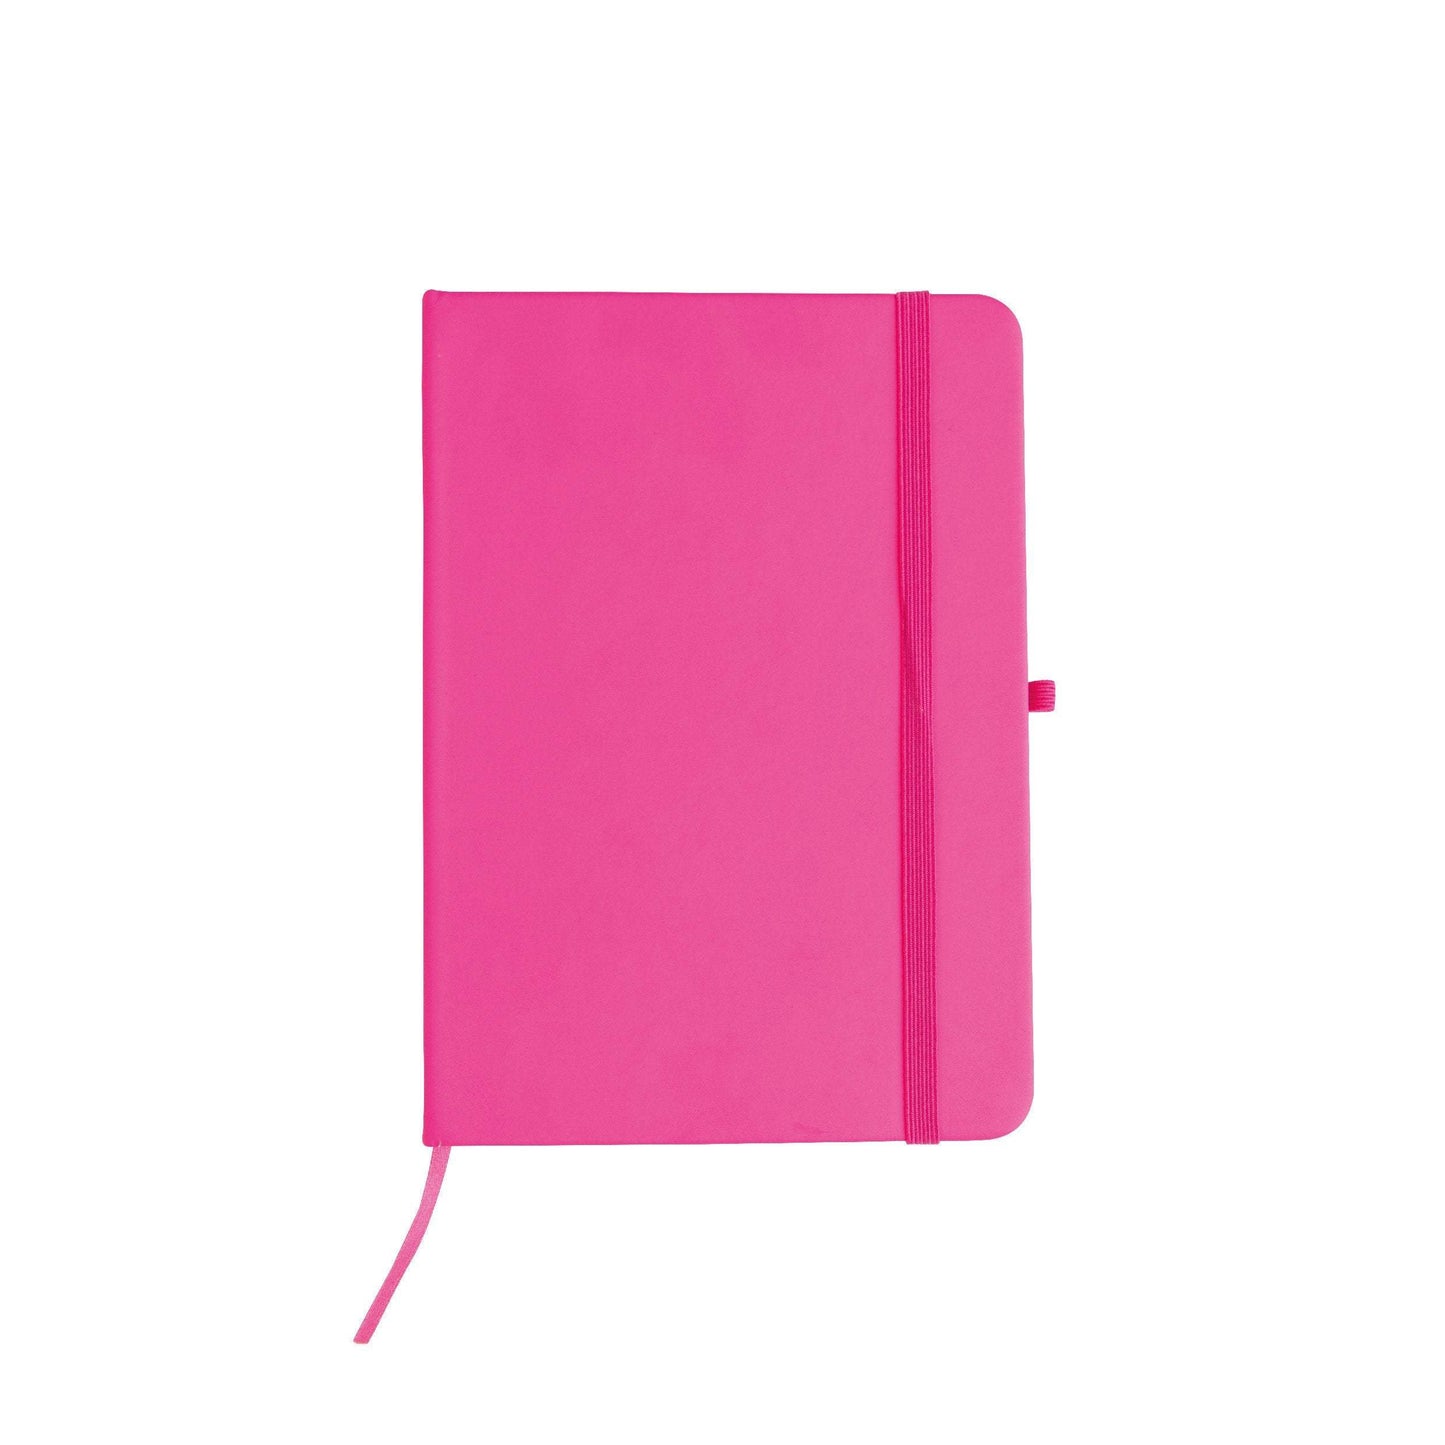 Abbey Notebook - Promotions Only Group Limited